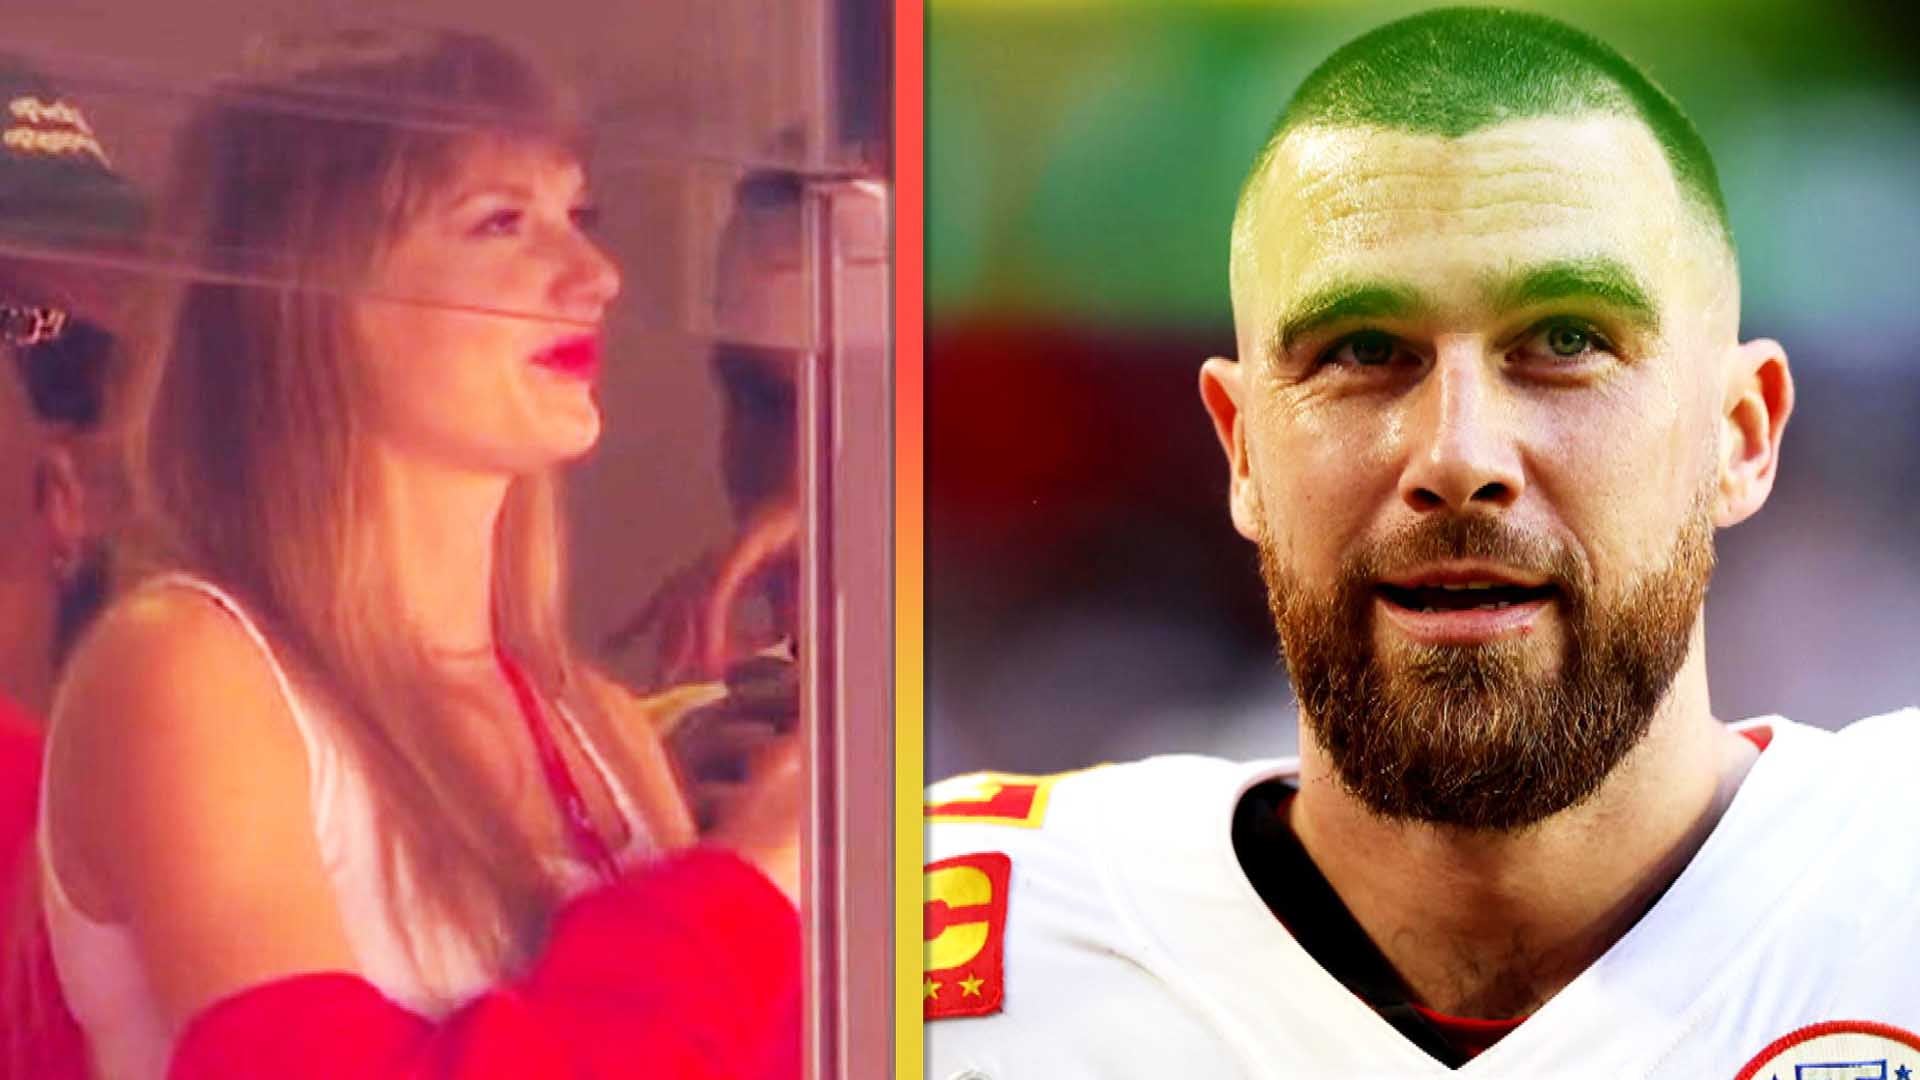 Travis Kelce in the (1989) Bedroom Painting Set. Travis you are an